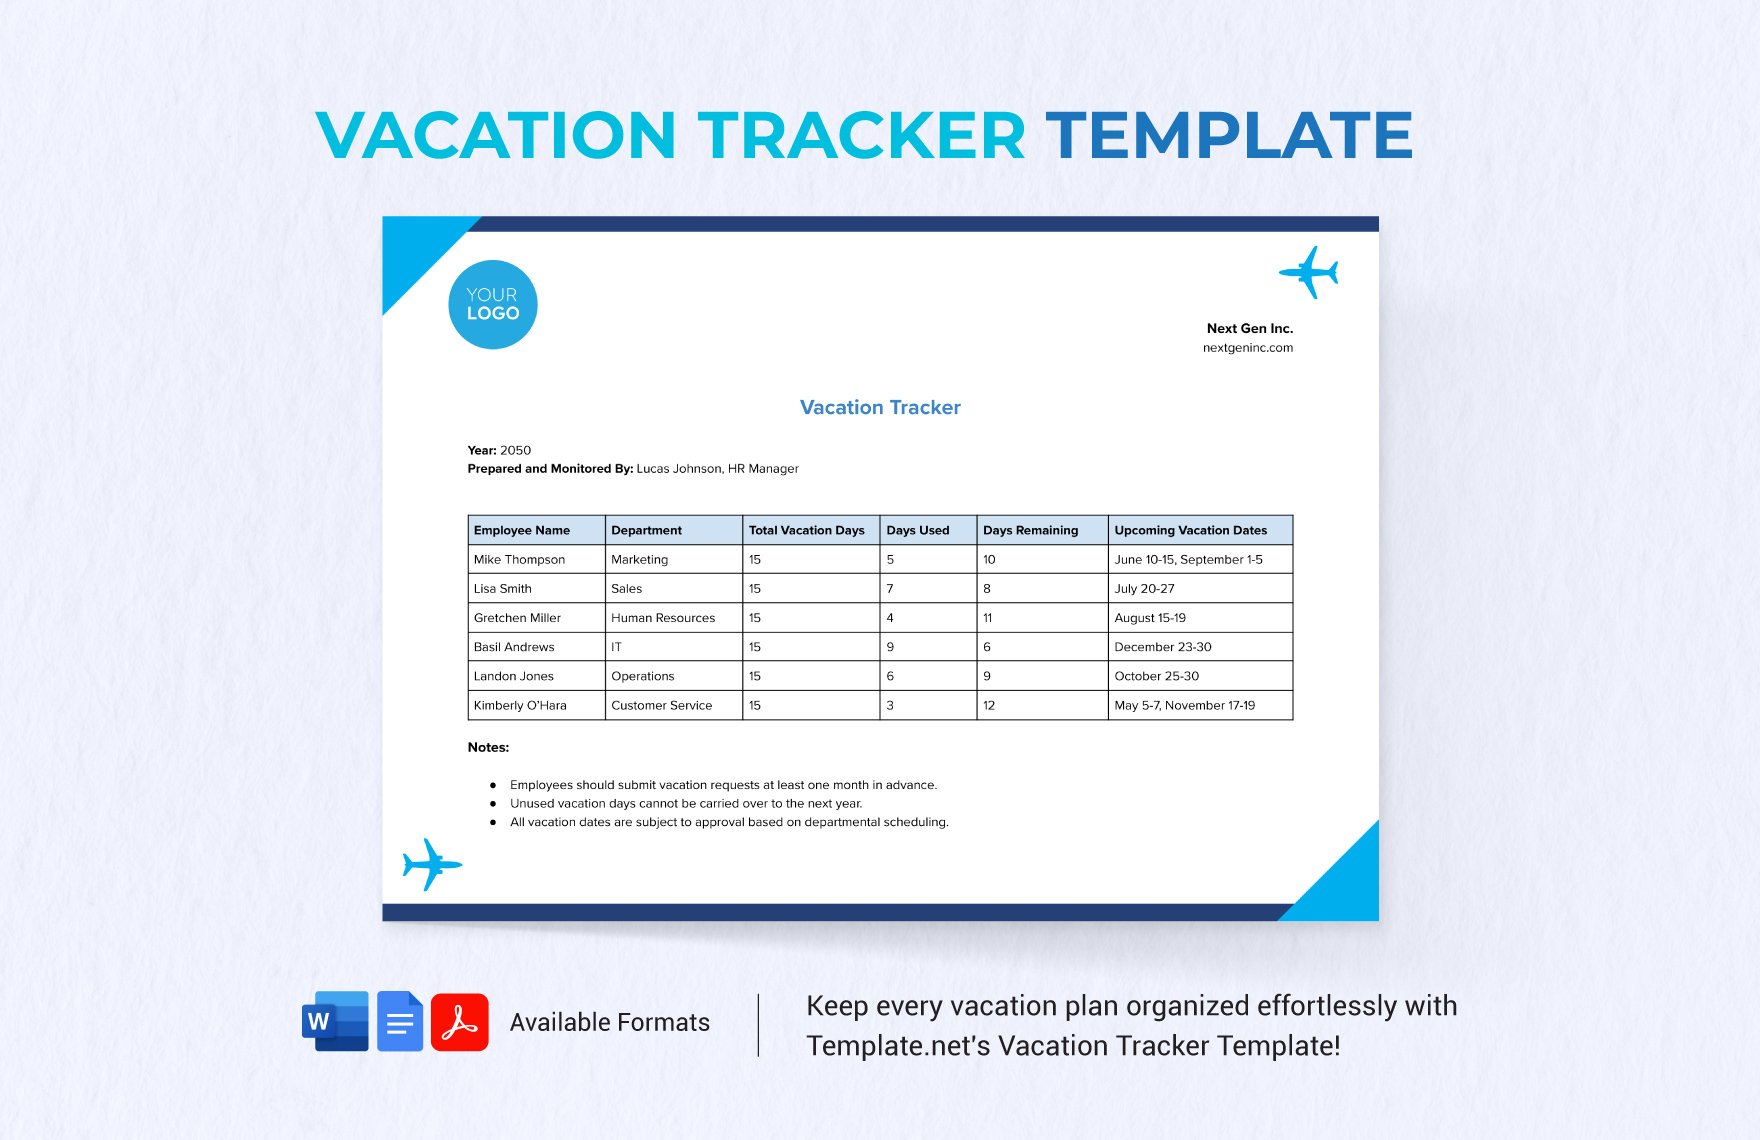 Free Vacation Tracker Template in Word, Google Docs, PDF